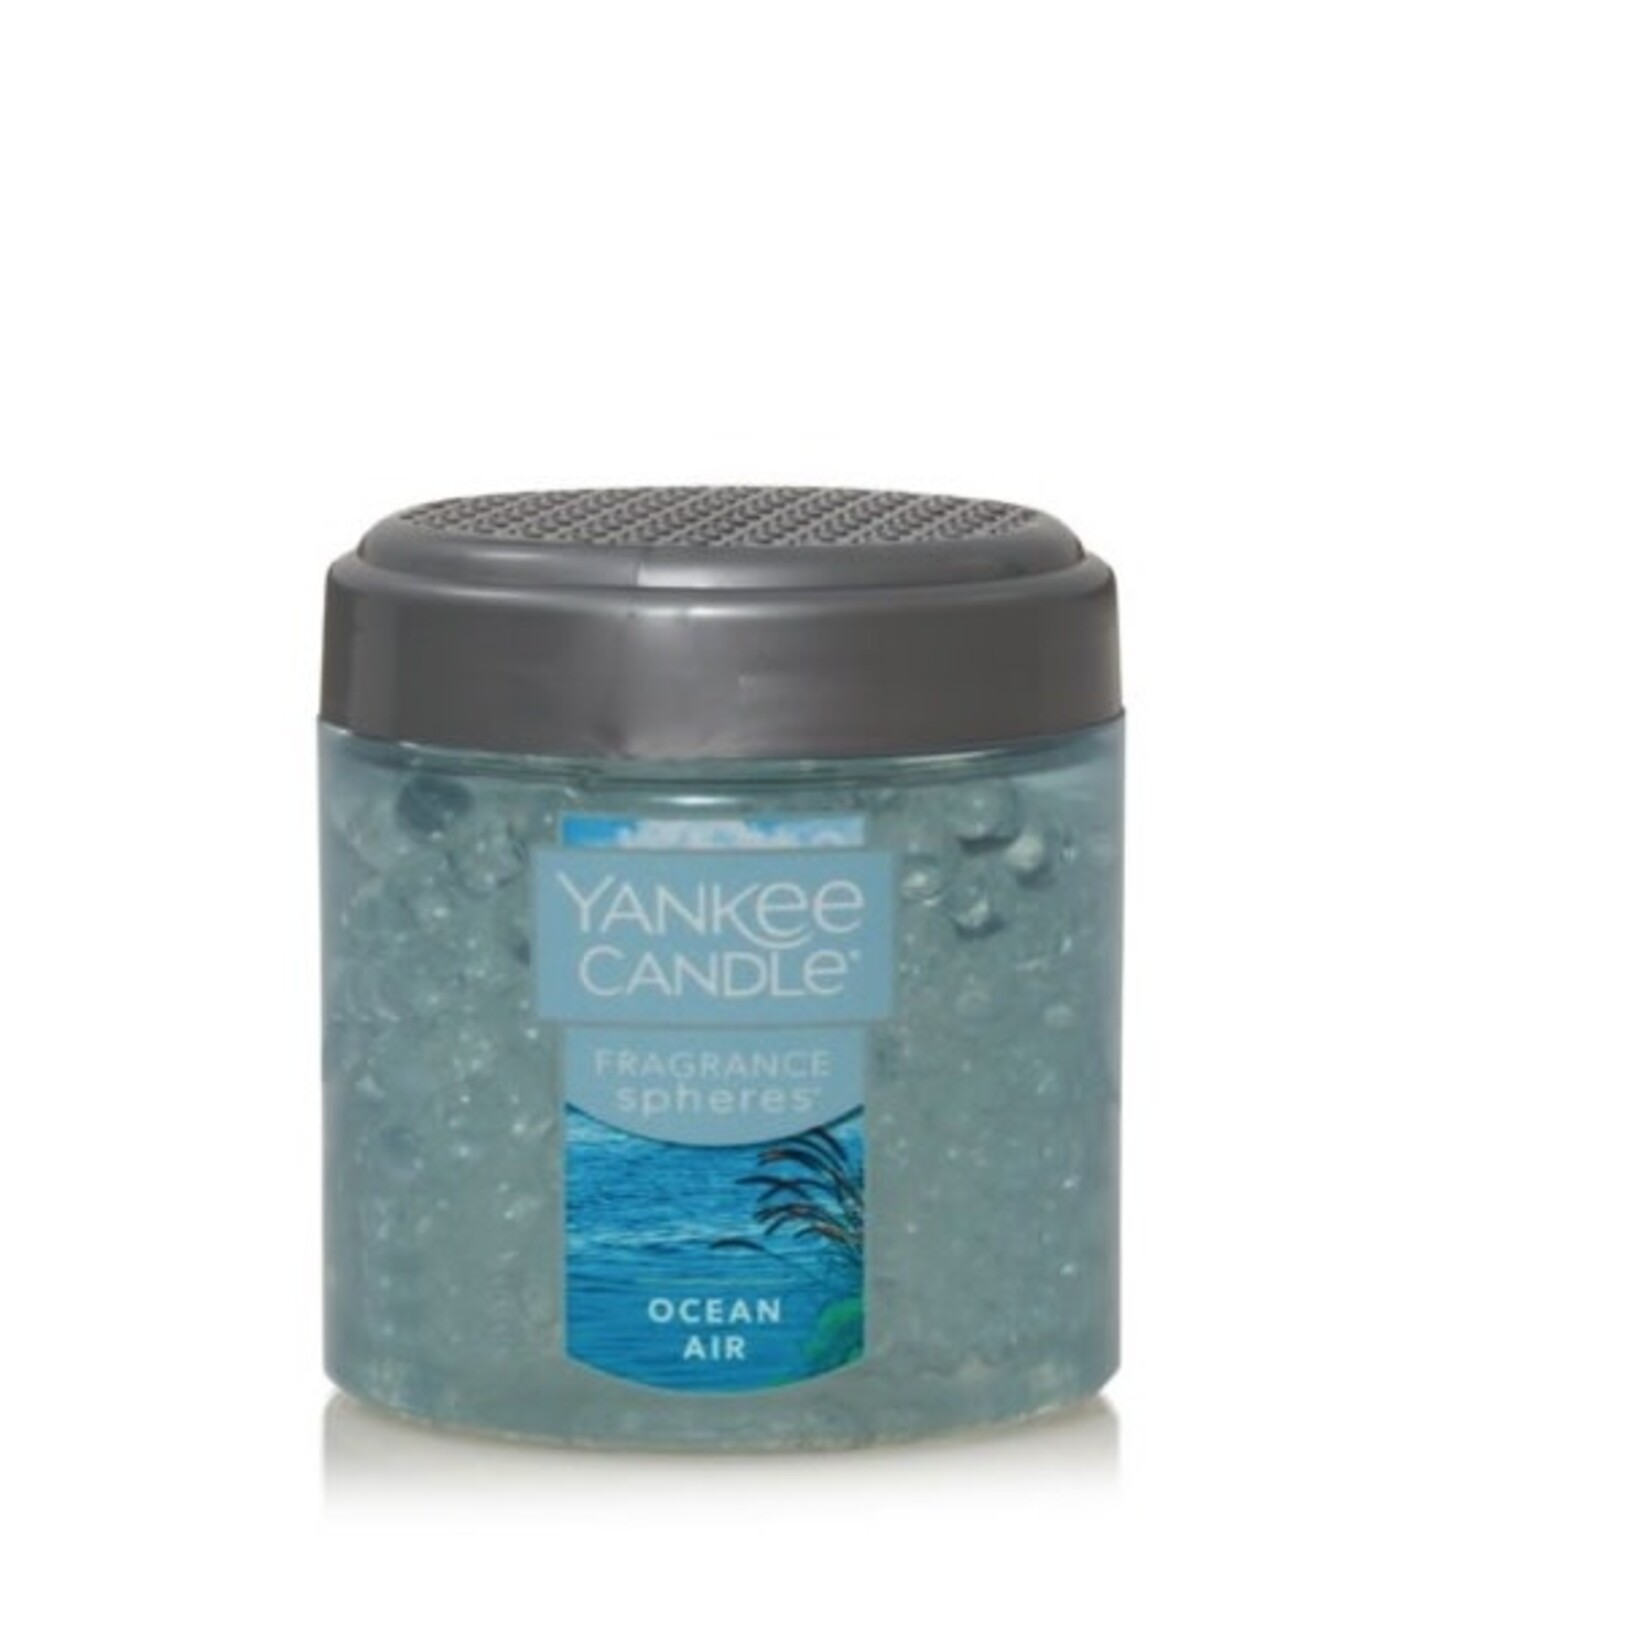 Yankee Candles Yankee Candle Fragrance Spheres Odor Neutralizing Ocean Air Scent Beads